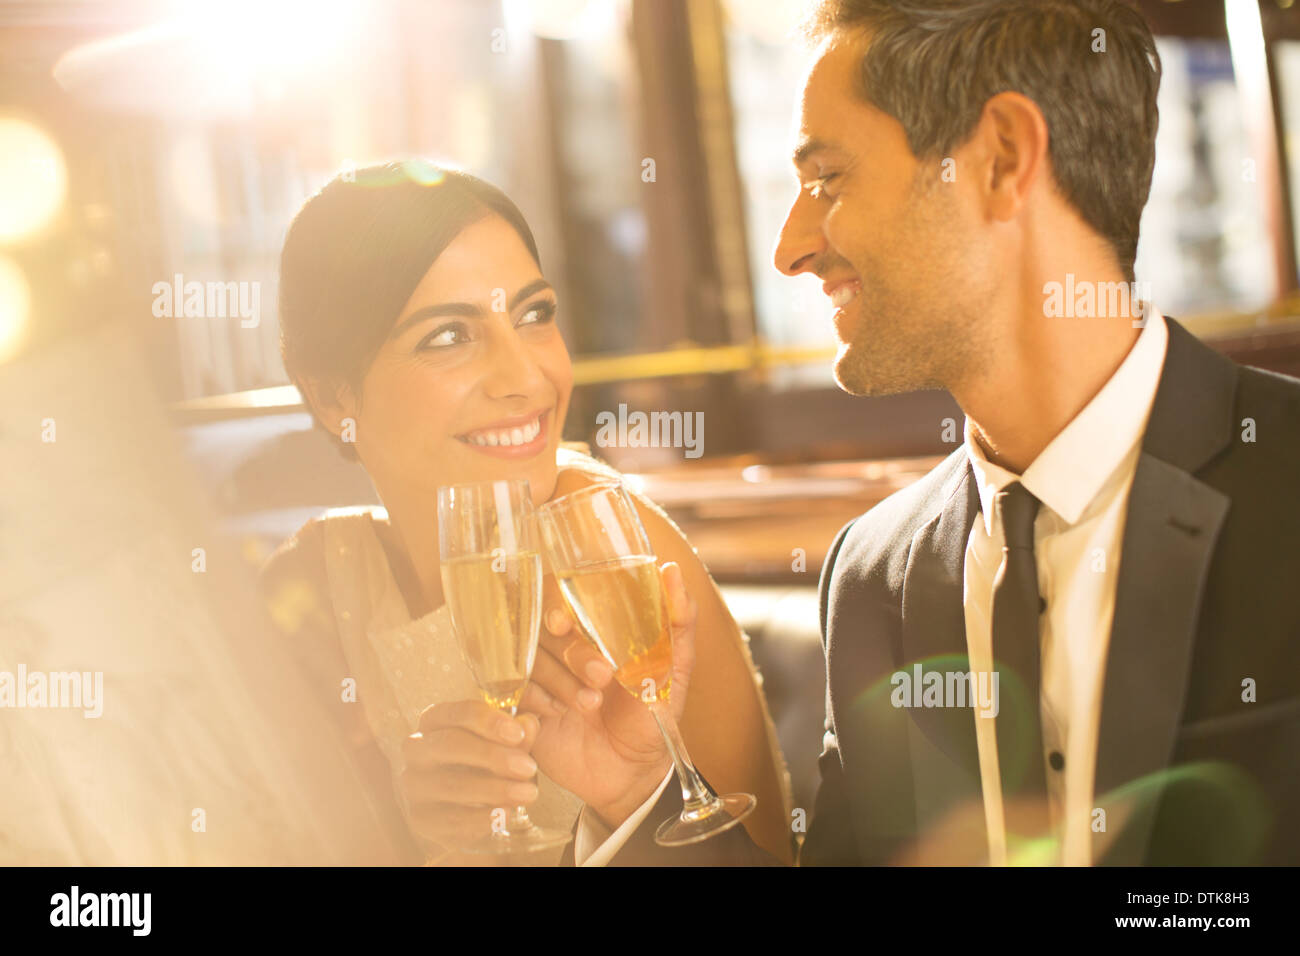 Bien-habillé couple toasting with champagne flutes in restaurant Banque D'Images